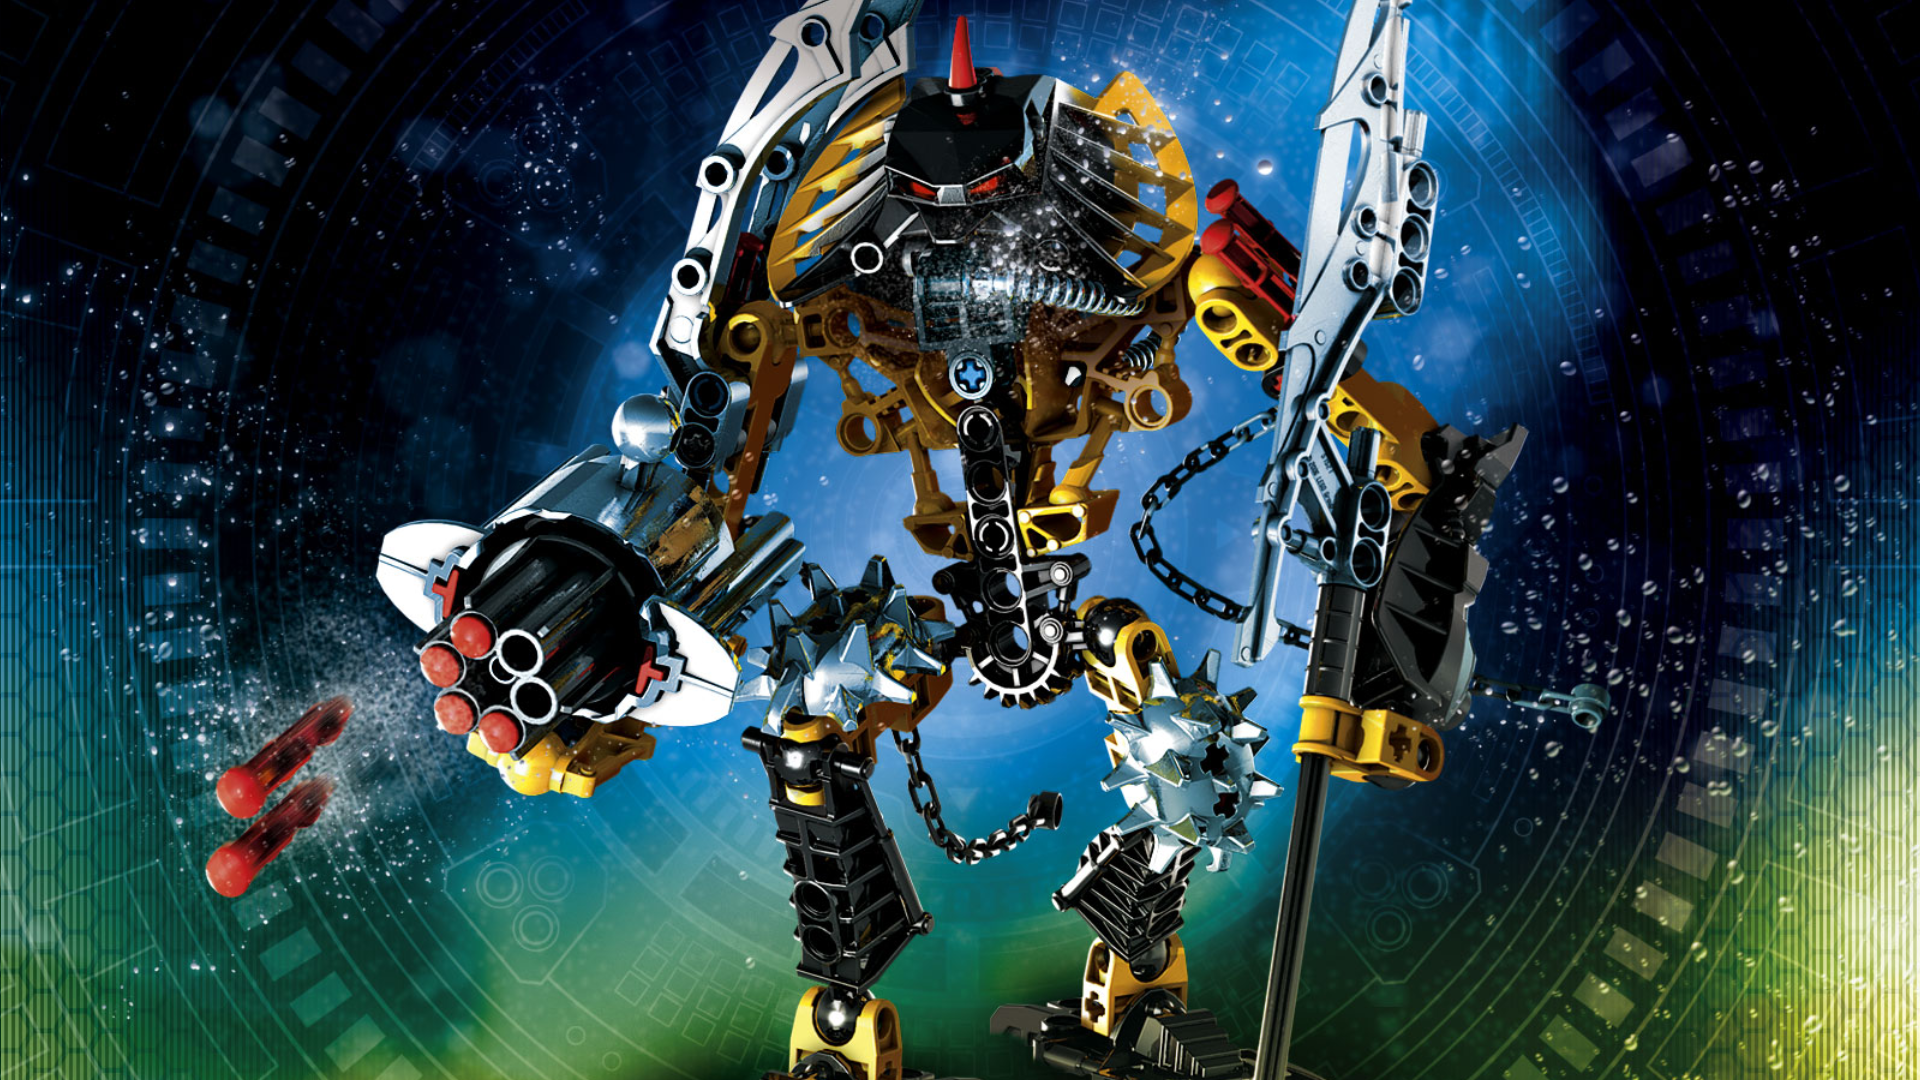 bionicle wallpaper,action adventure game,games,graphic design,mecha,fictional character